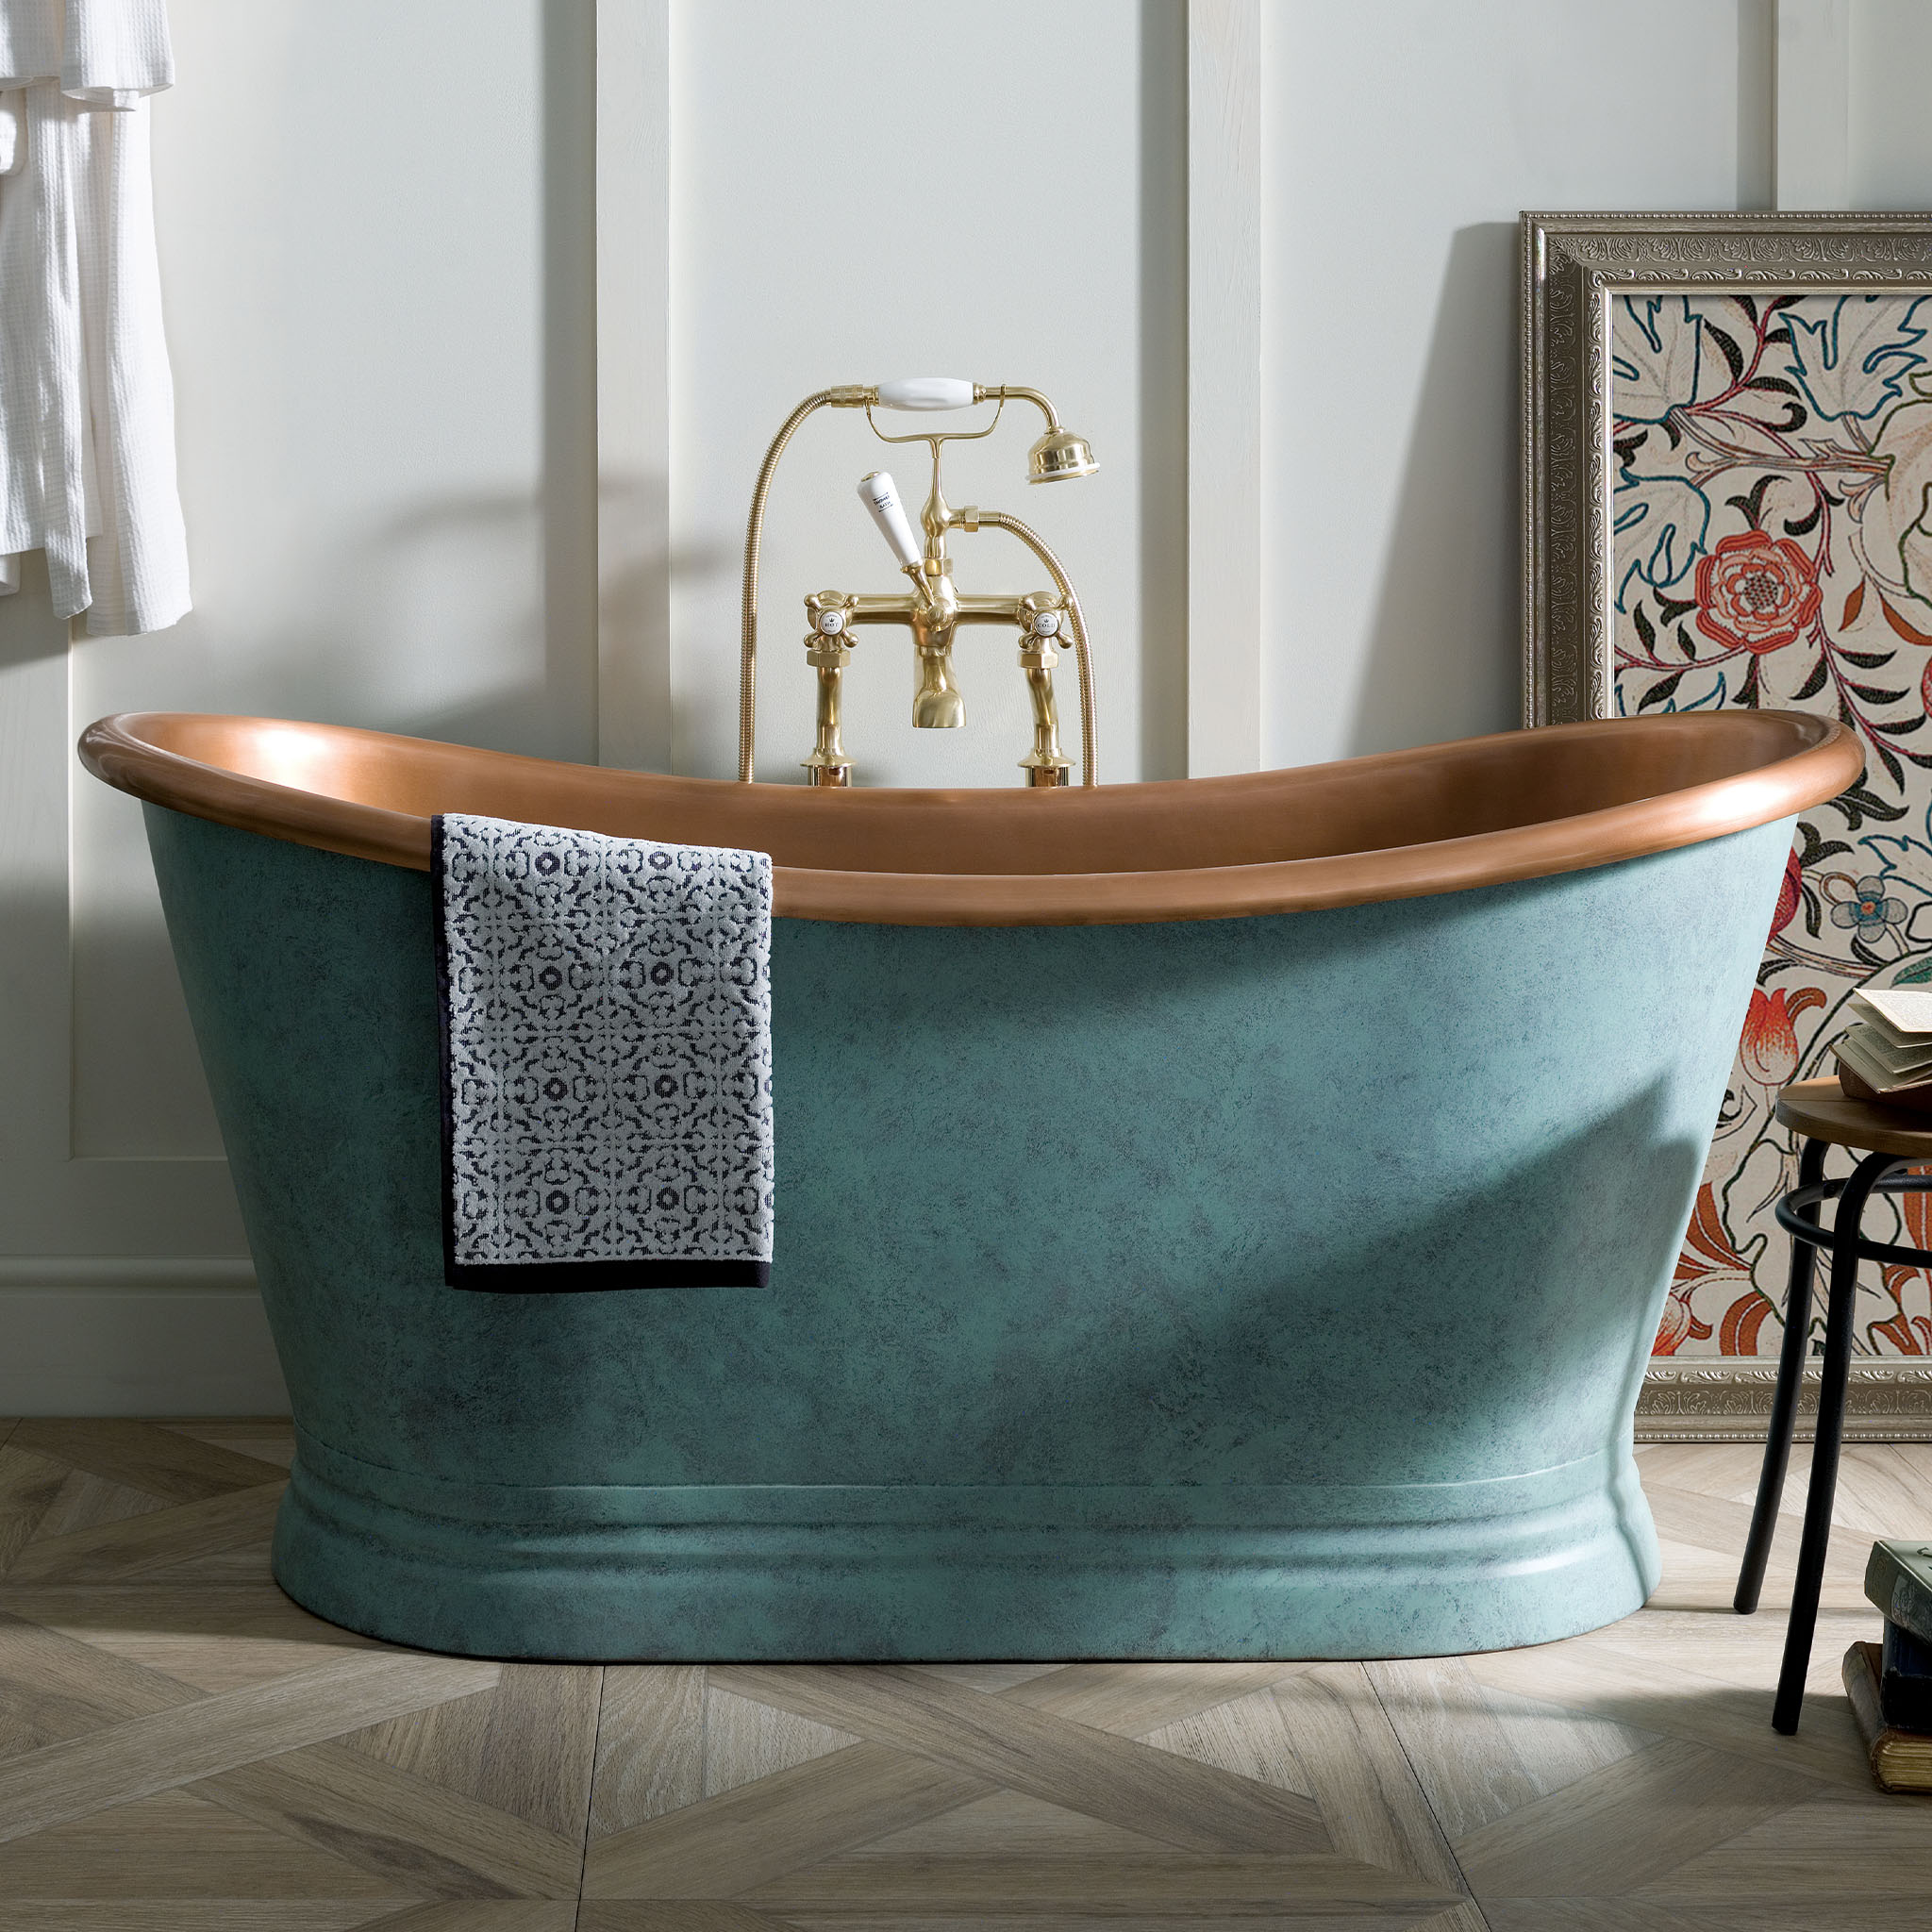 BC Designs Verdigris Green Copper Boat Double Ended Roll Top Bath